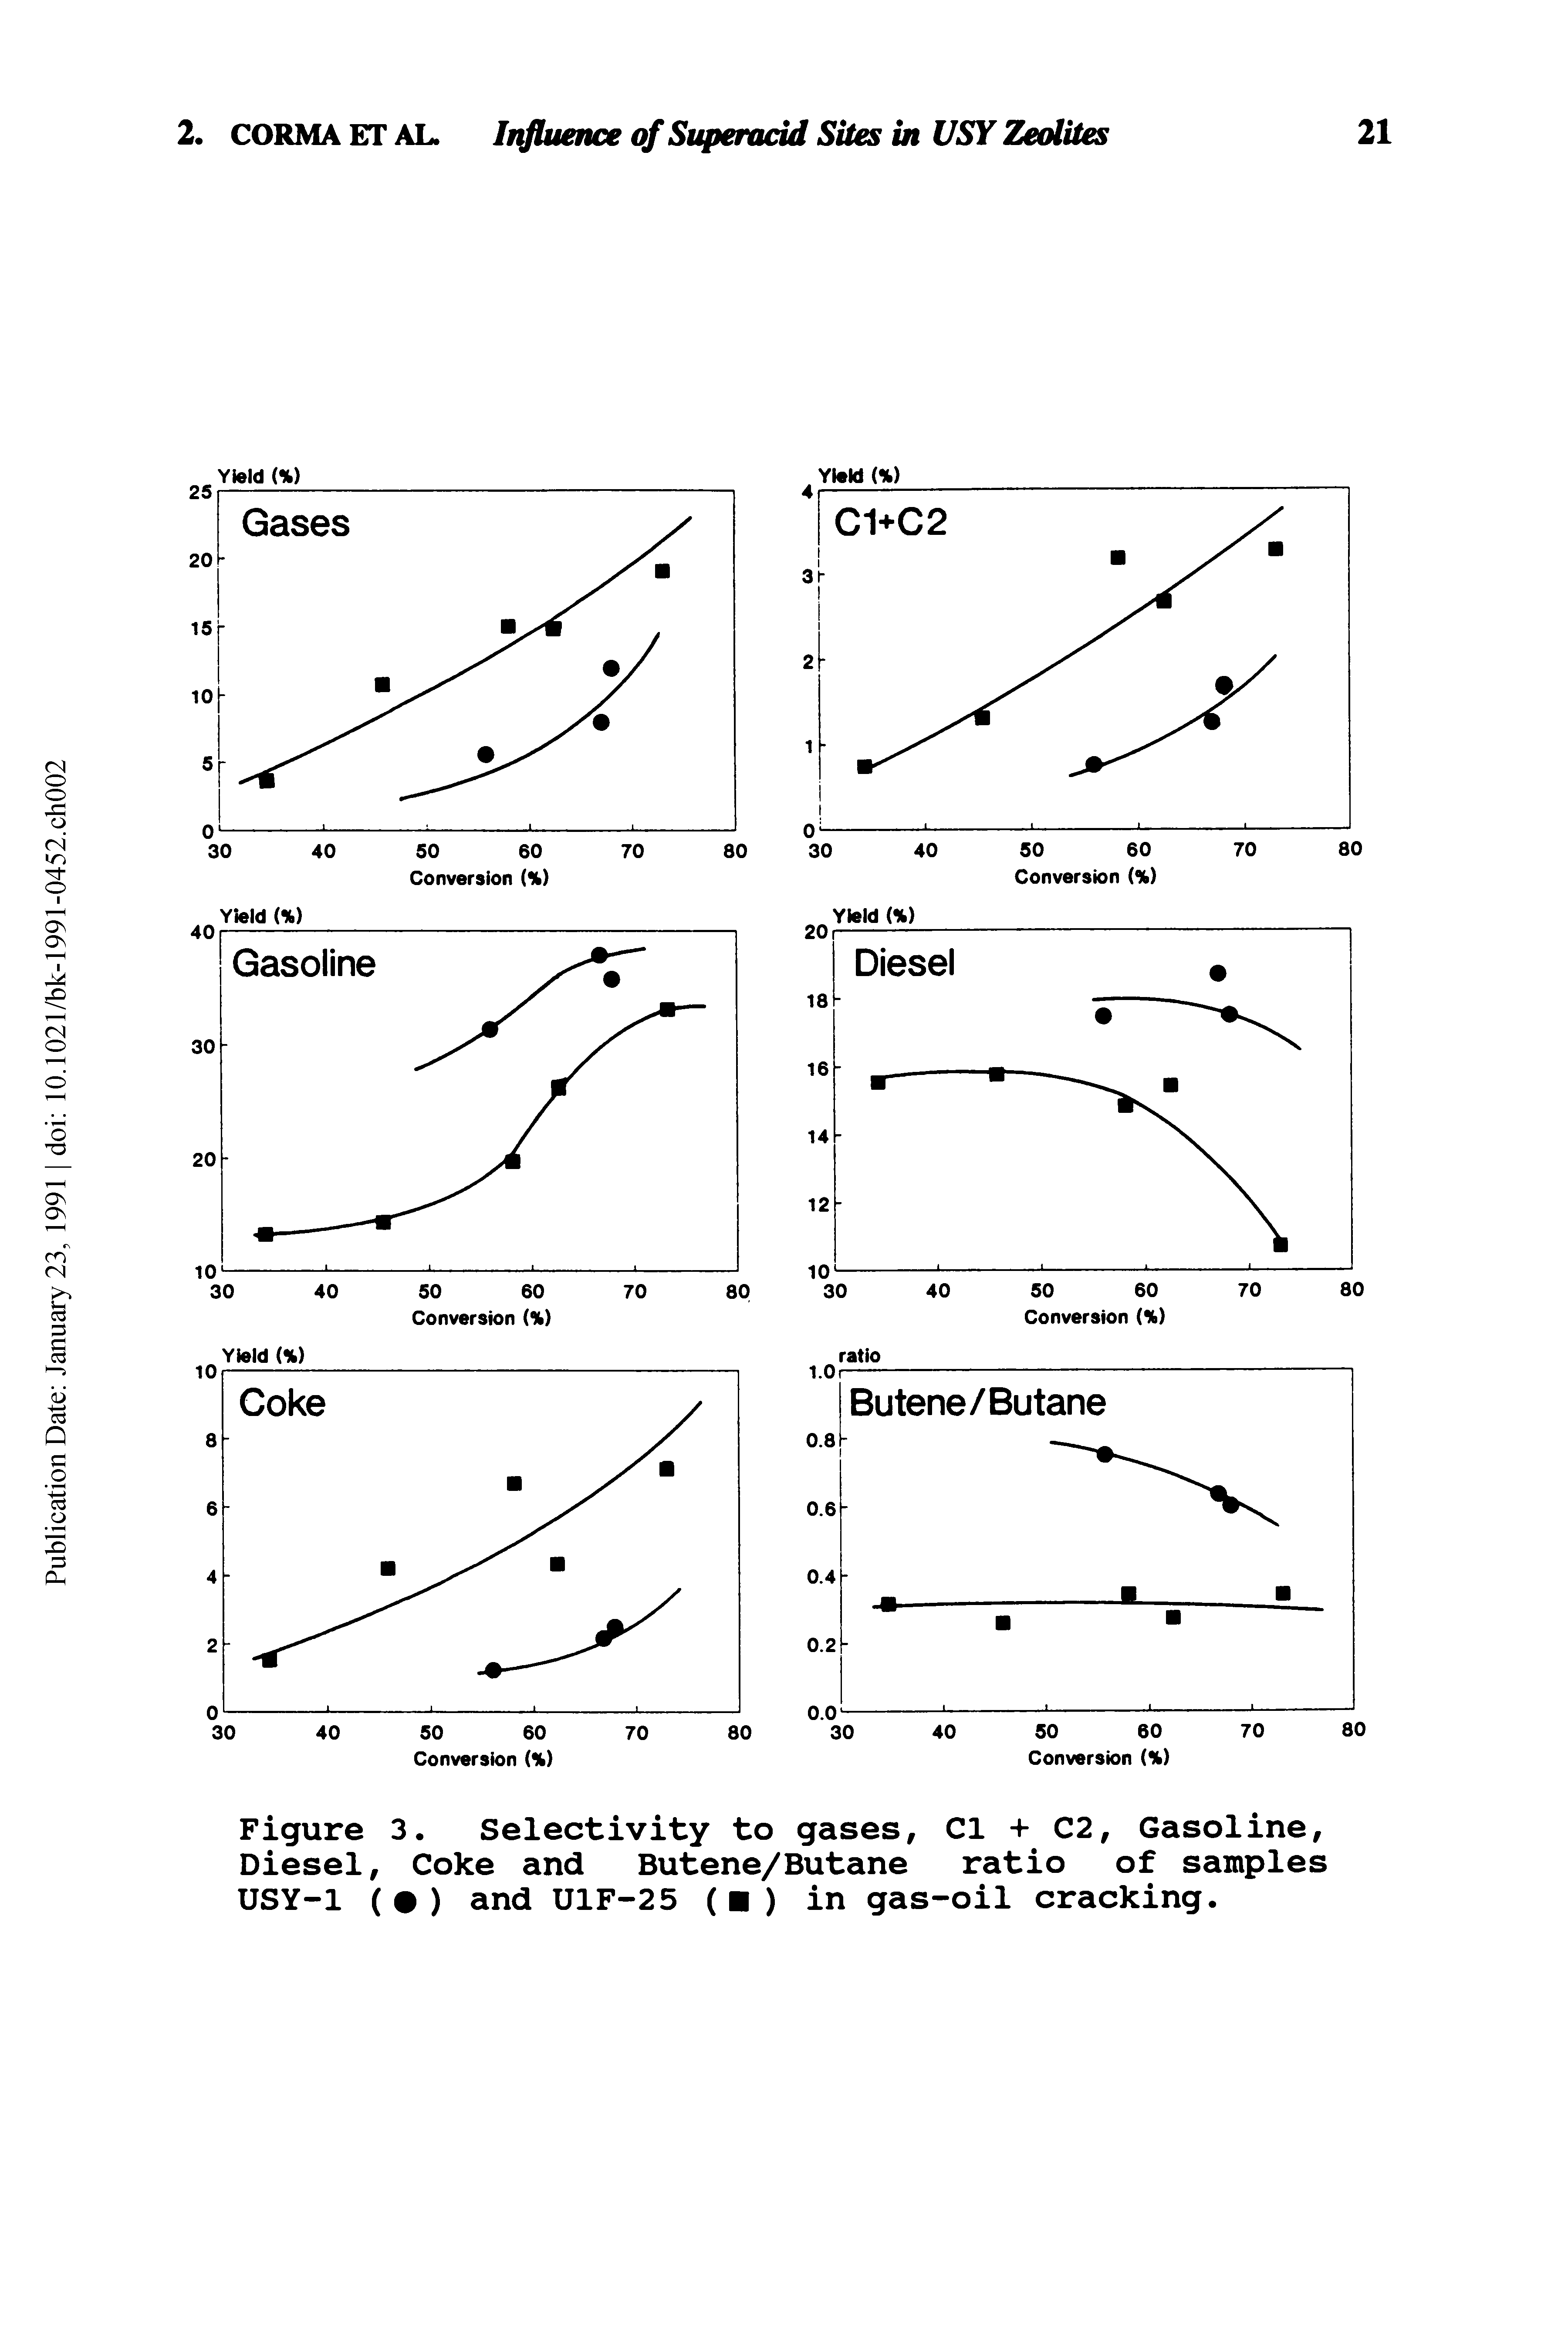 Figure 3. Selectivity to gases, Cl + C2, Gasoline, Diesel, Coke and Butene/Butane ratio of samples USY-1 ( ) and U1F-25 ( ) in gas-oil cracking.